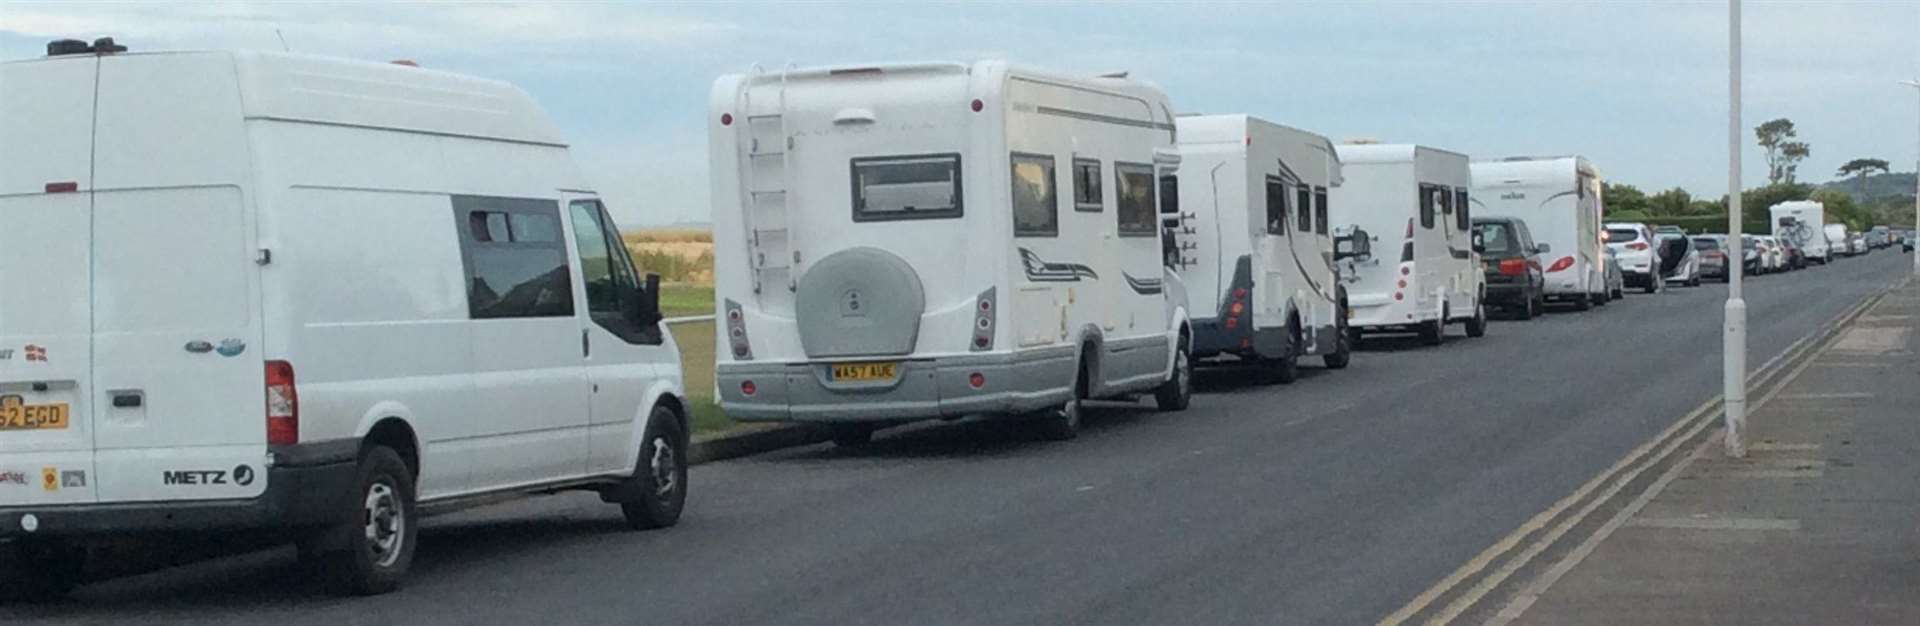 Motorhomes line the seafront road in Walmer Picture: Pip Bailey